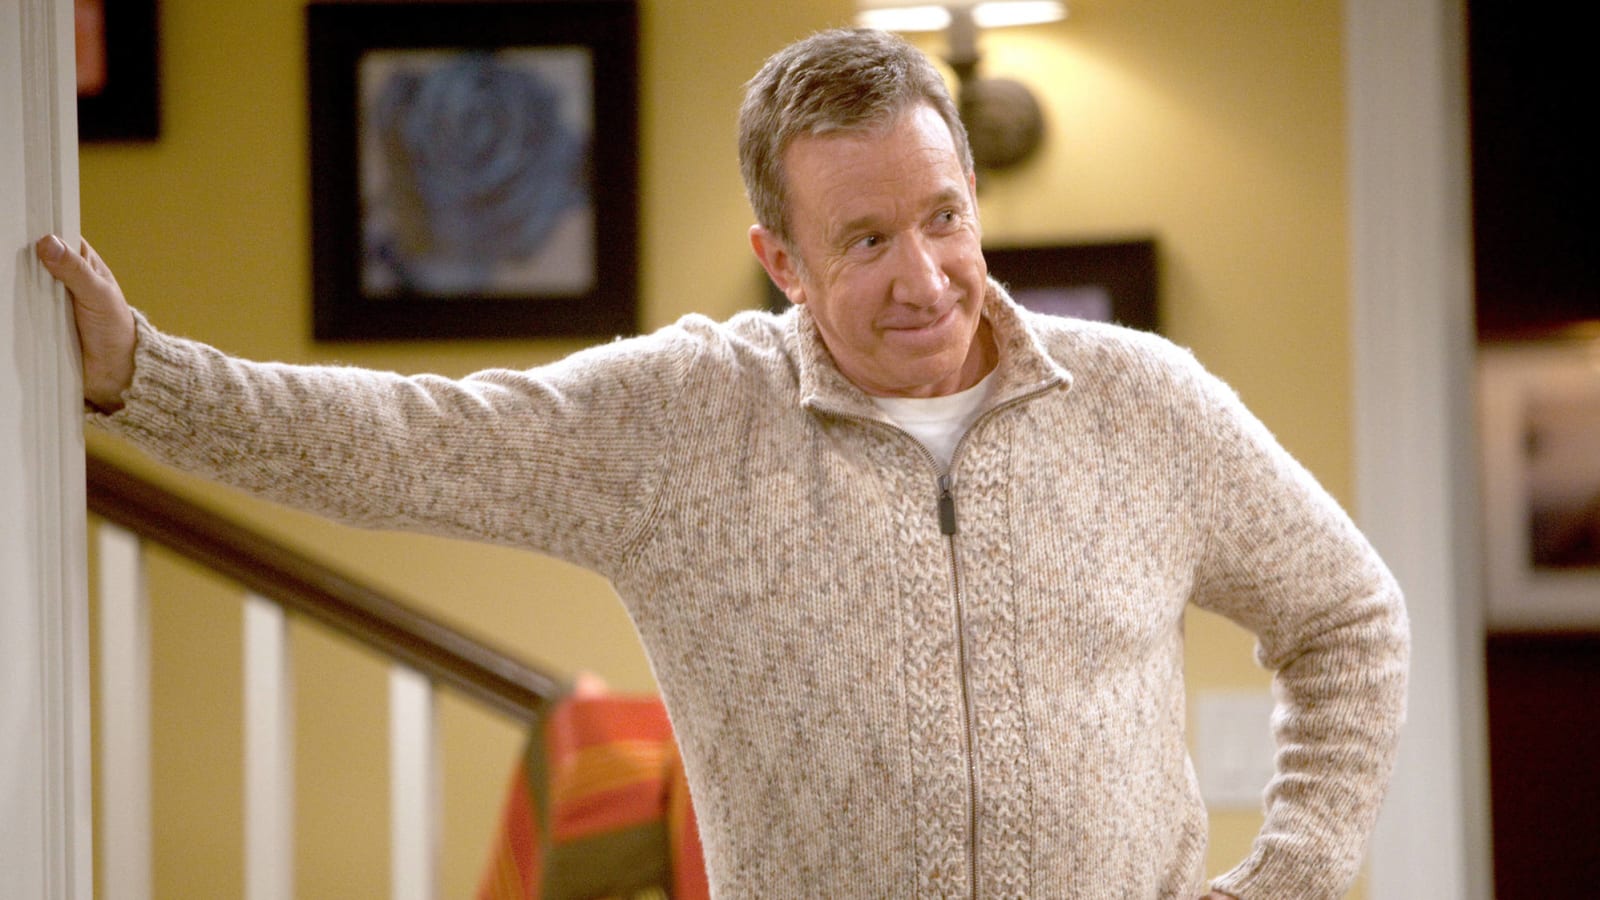 Tim Allen humbled by reaching 'Last Man Standing' finale